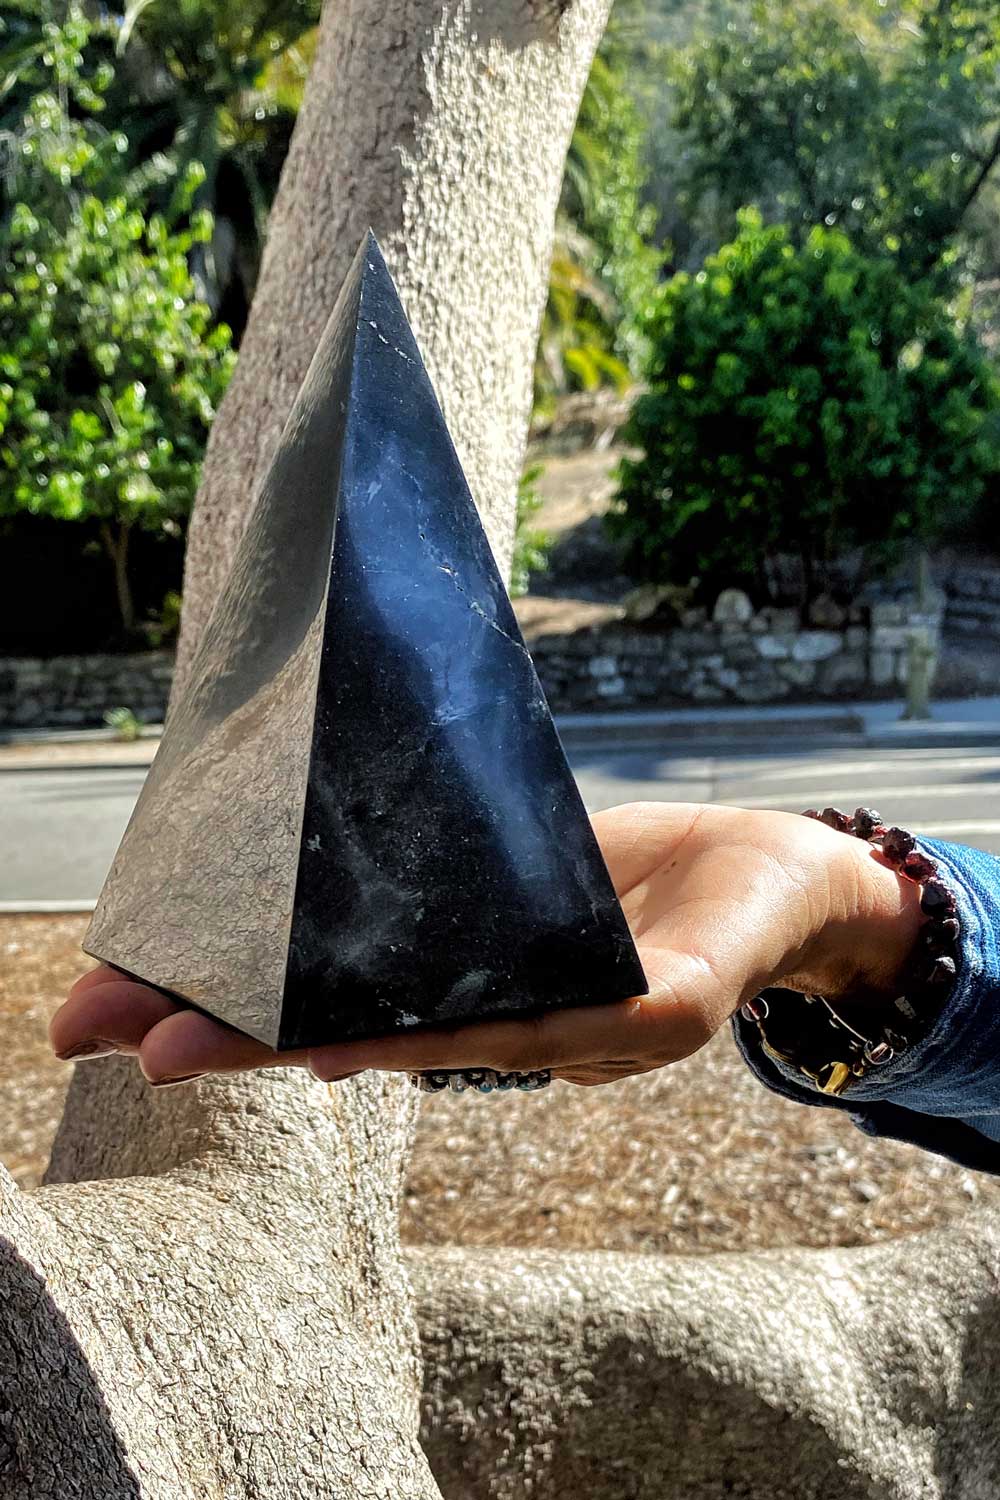 extra tall genuine shungite pyramid held in person's hand outside by Energy Muse